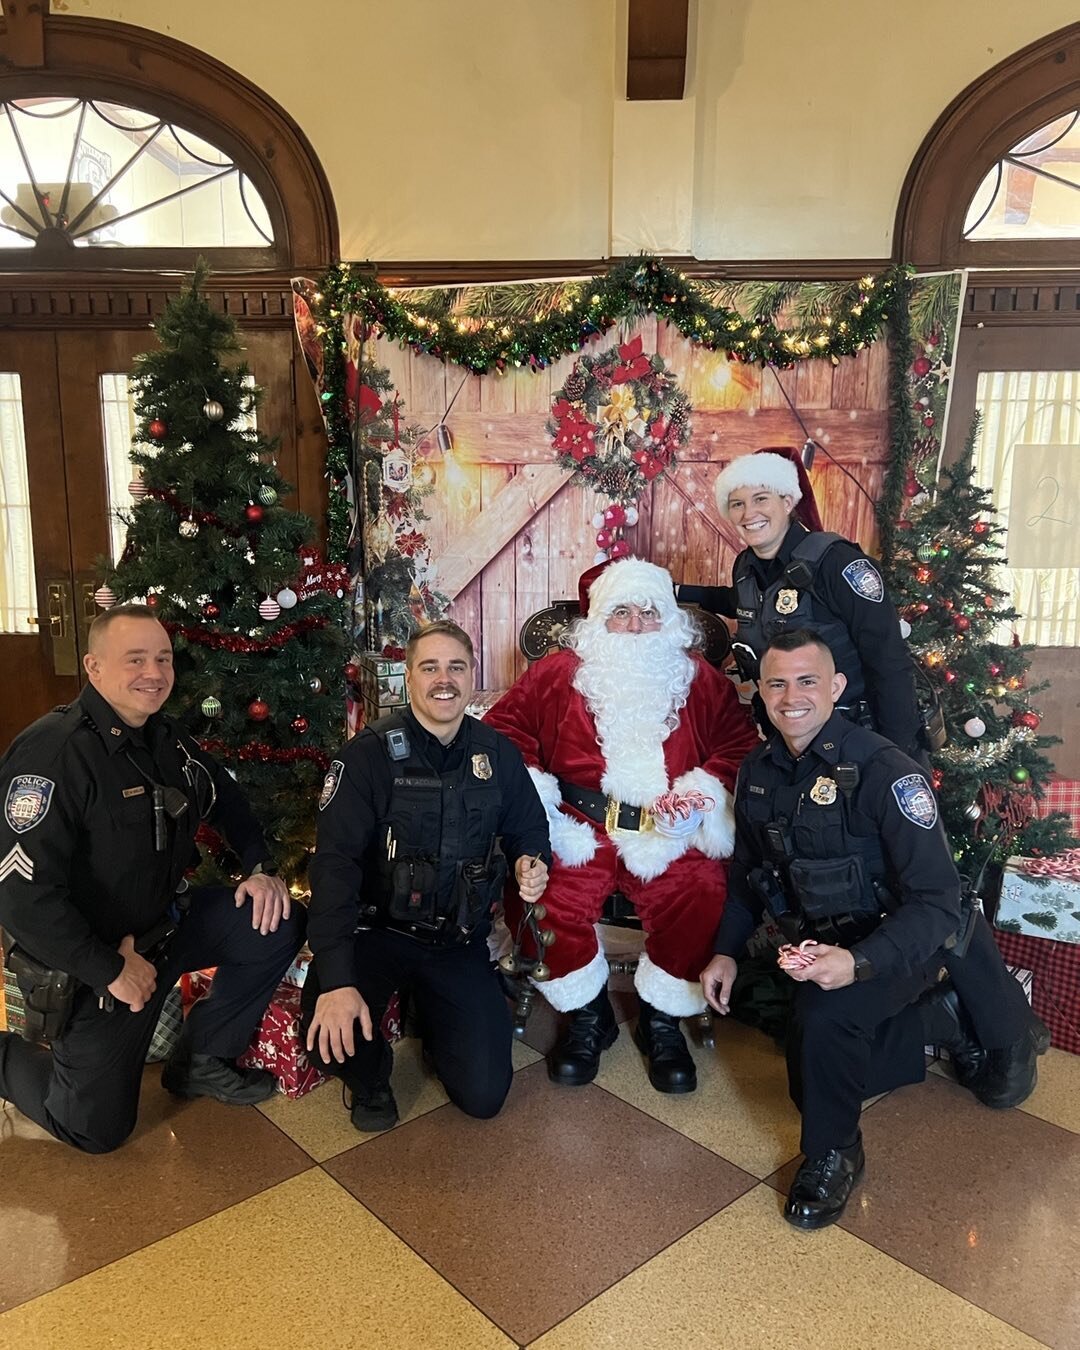 Members of the Southampton Village PBA brought Santa to school to spread some holiday cheer! Santa visited the Southampton Children&rsquo;s School, Our Lady of the Hamptons and Southampton Elementary to hand out candy canes to students. Thank you to 